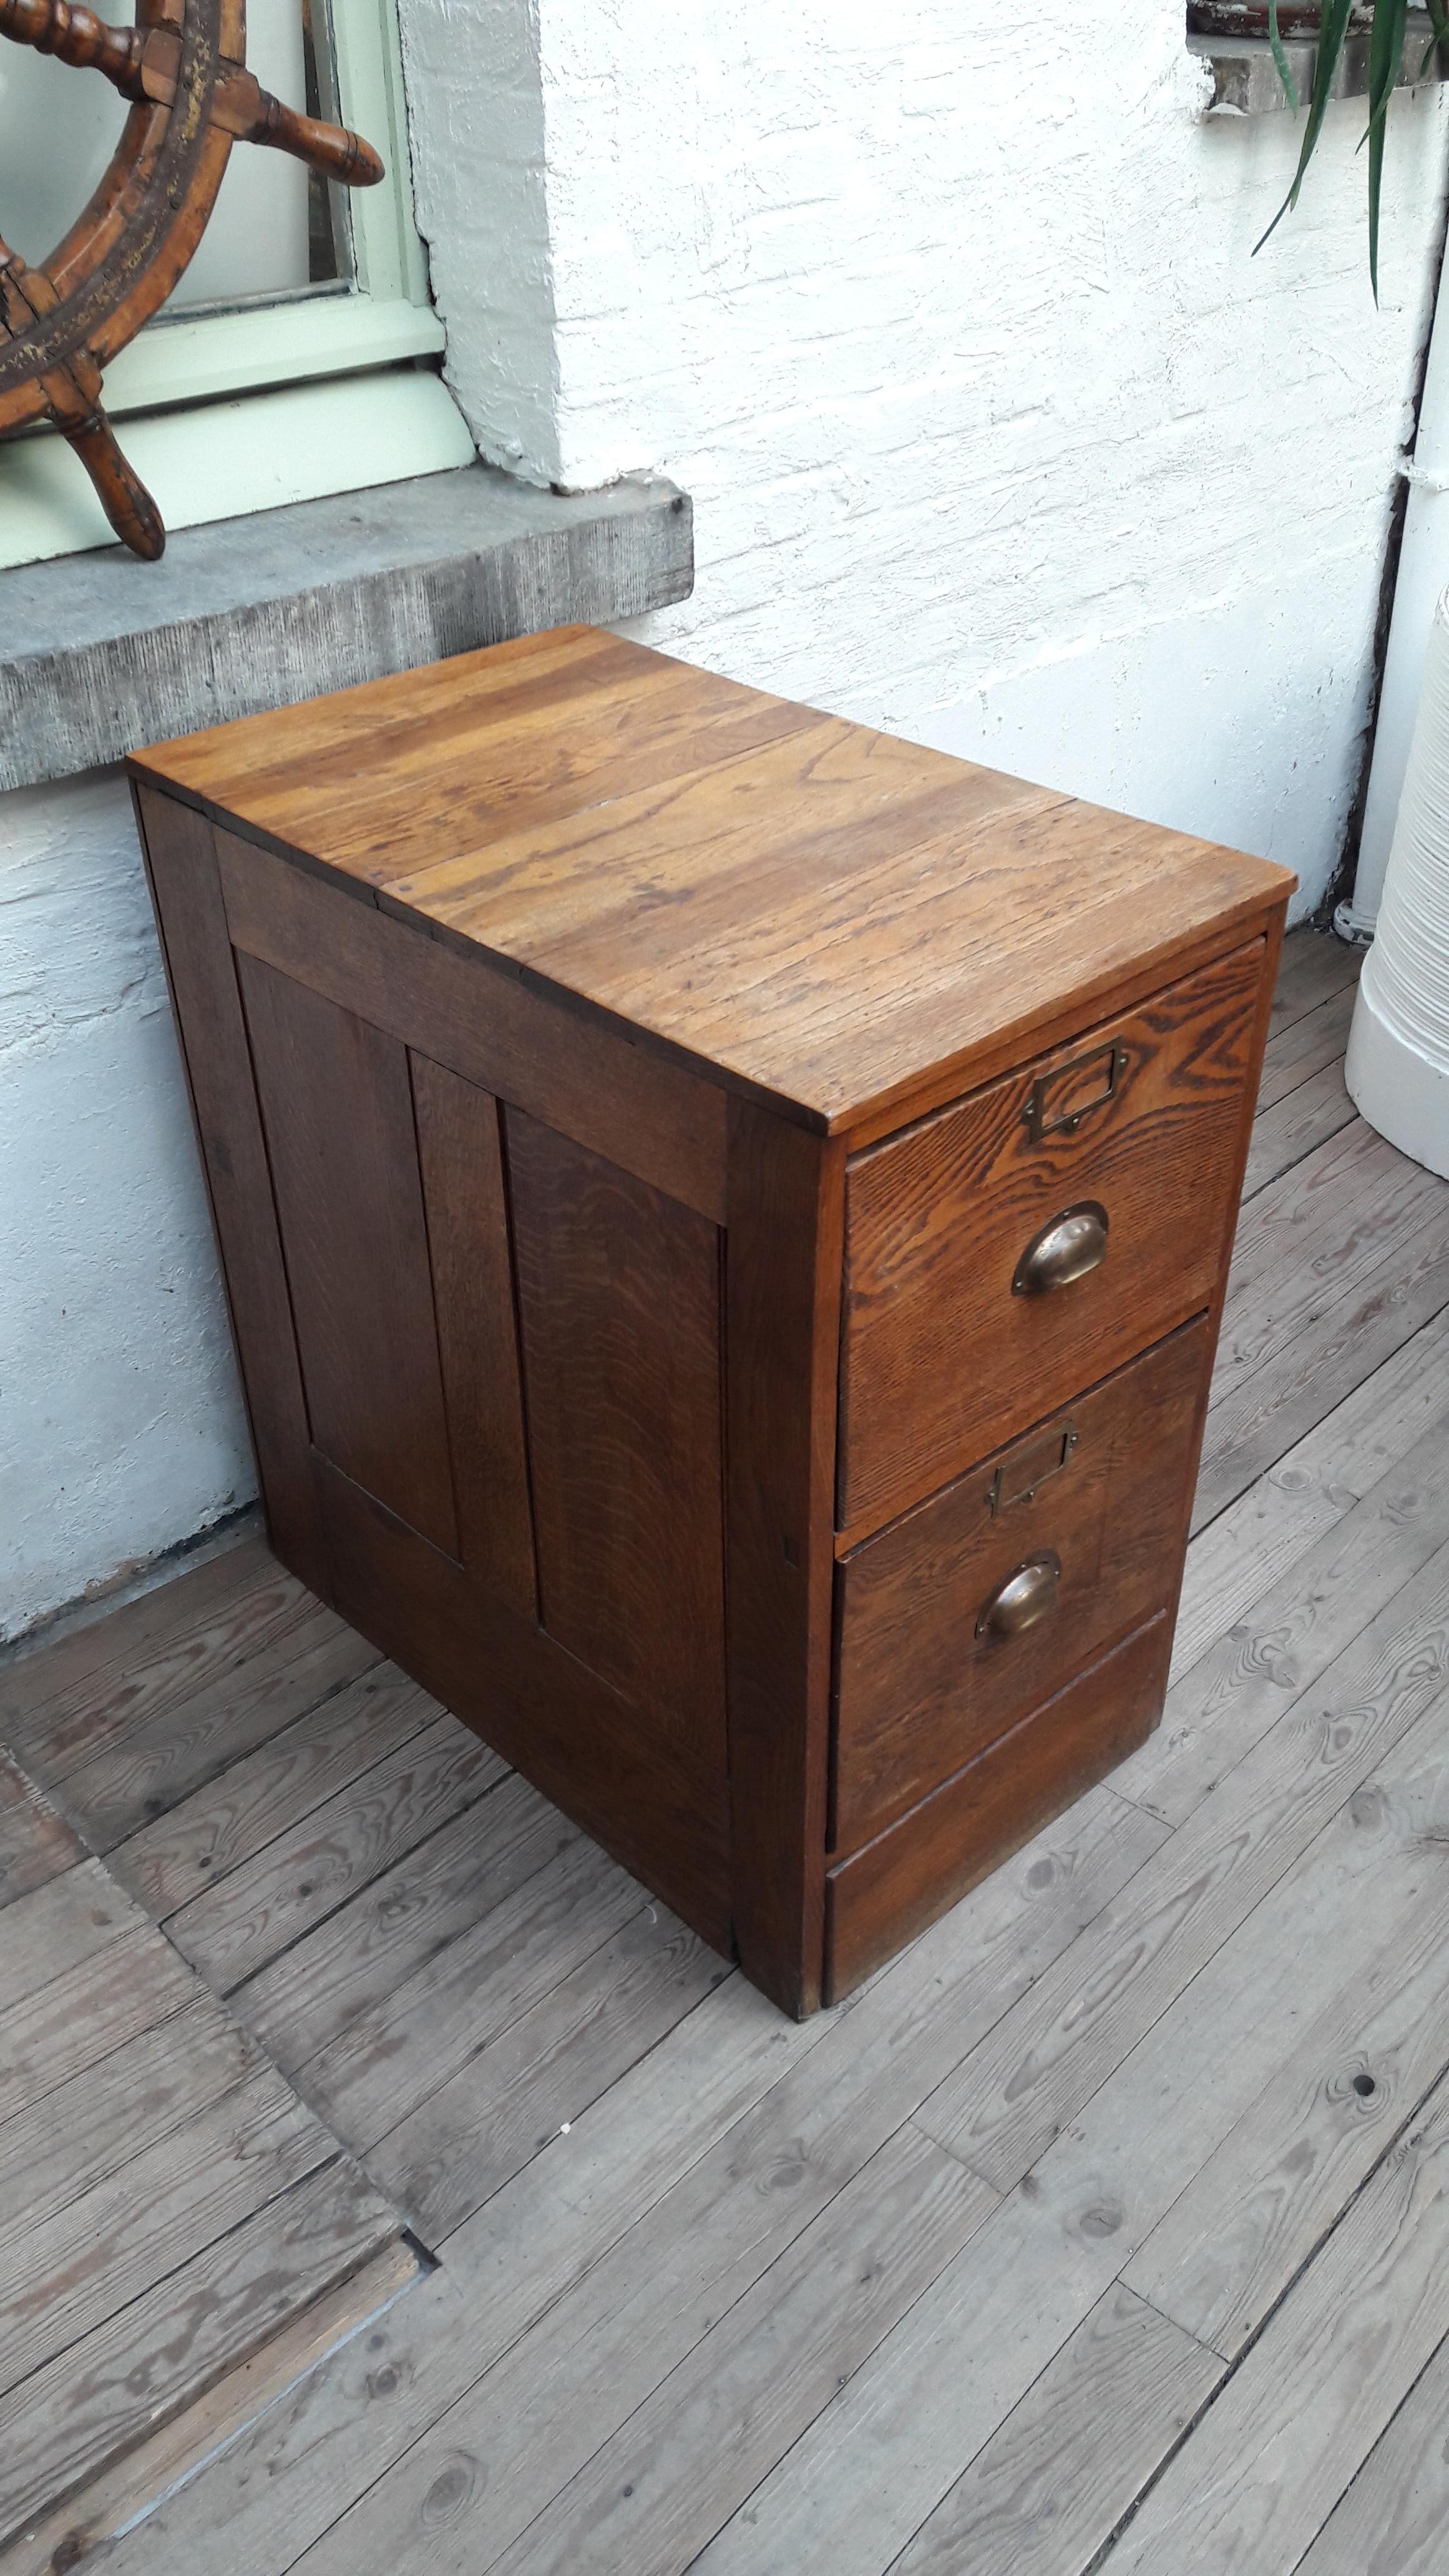 1930s English oak filing cabinet with brass handles. Great warm colour of the wood.